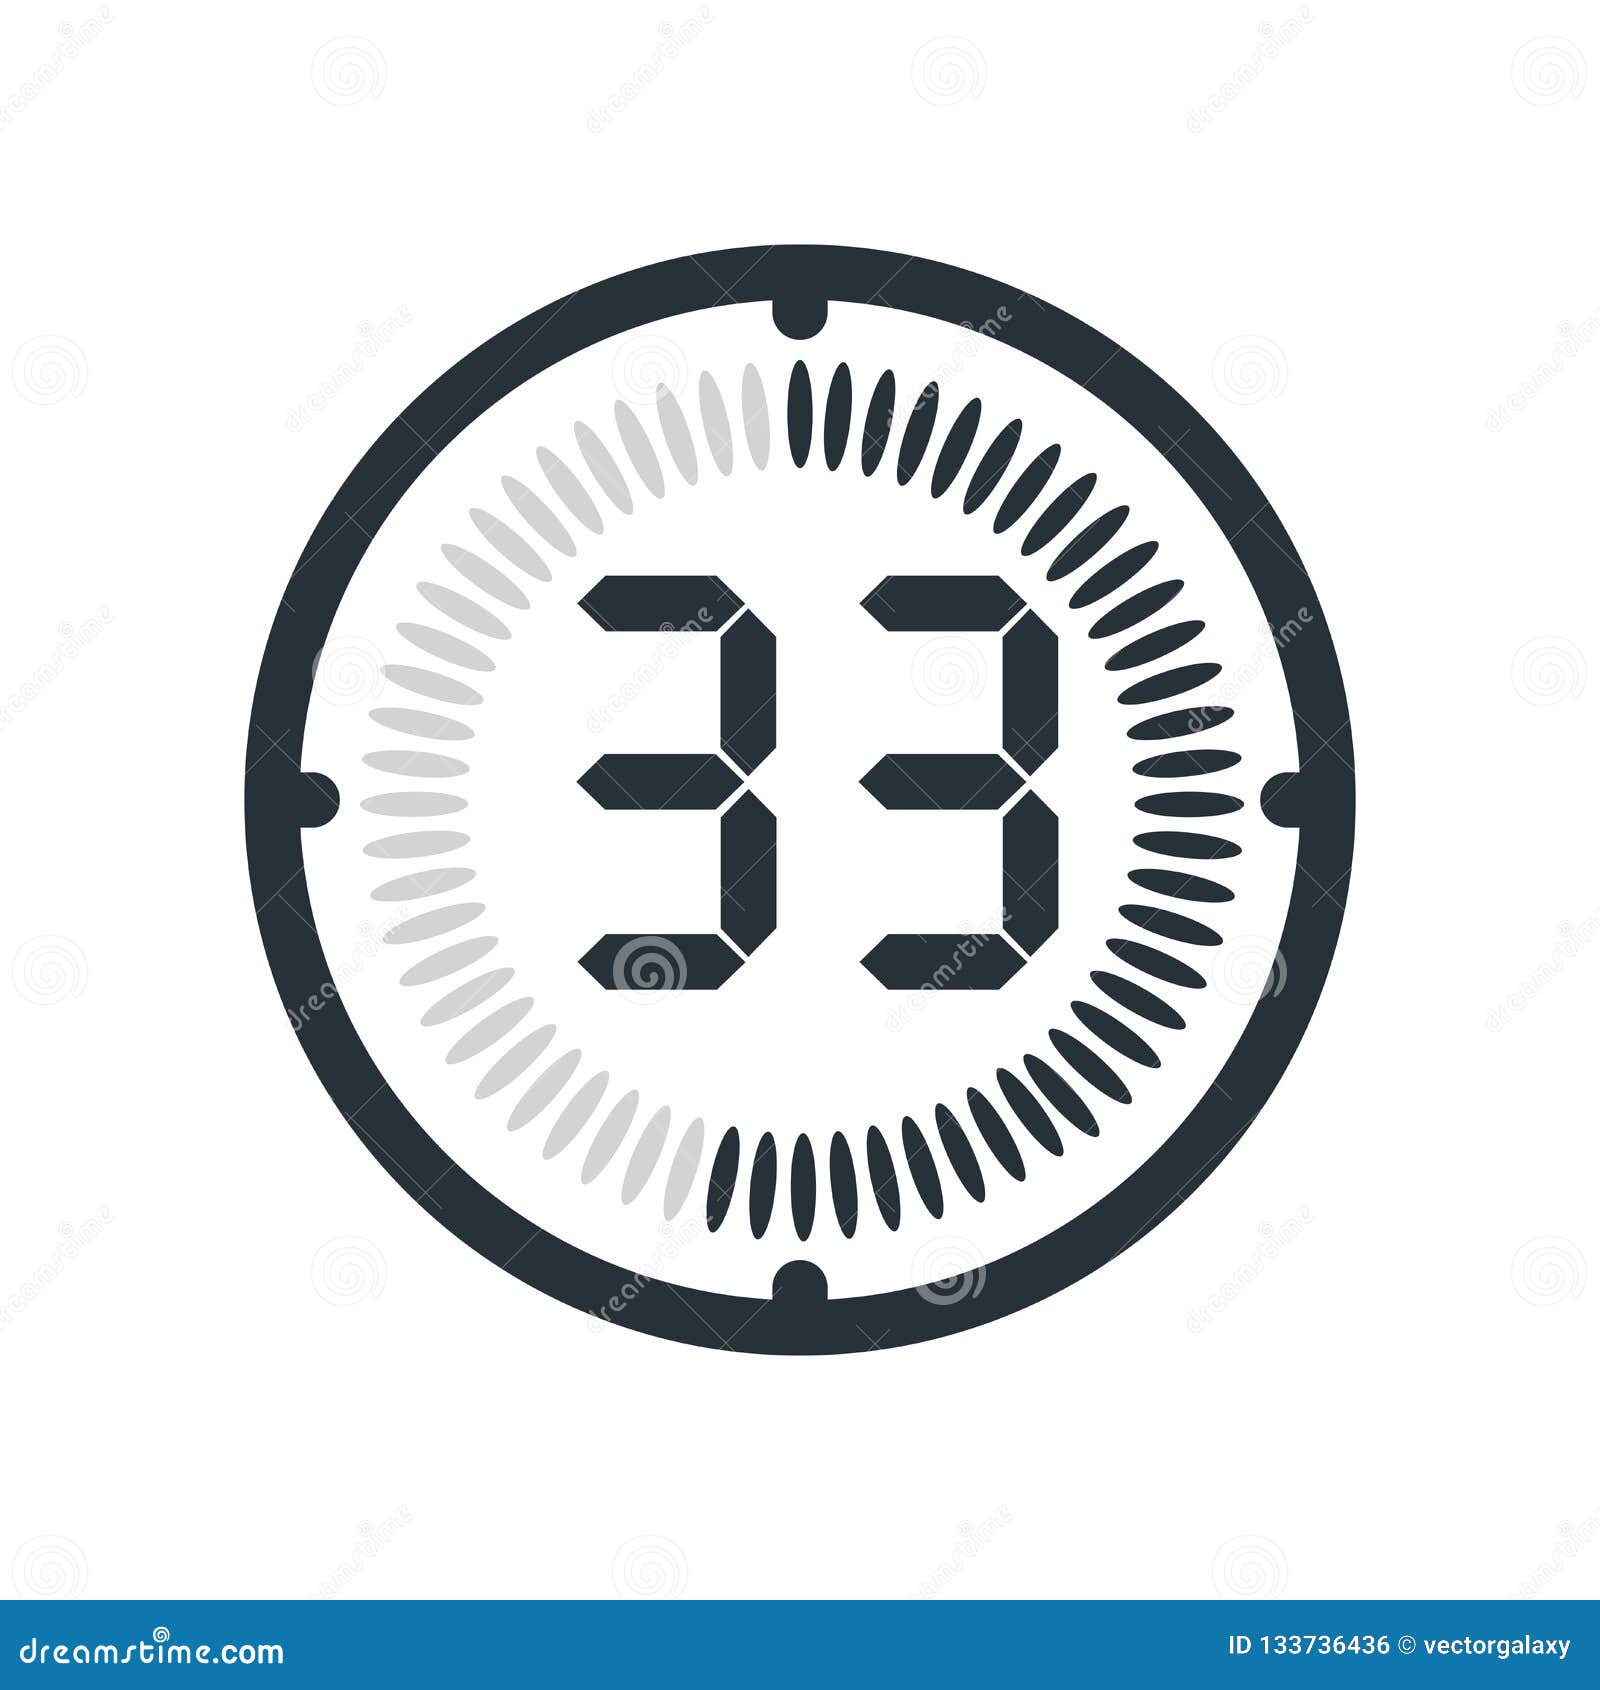 Stopwatch digital countdown timer with minutes and seconds vector